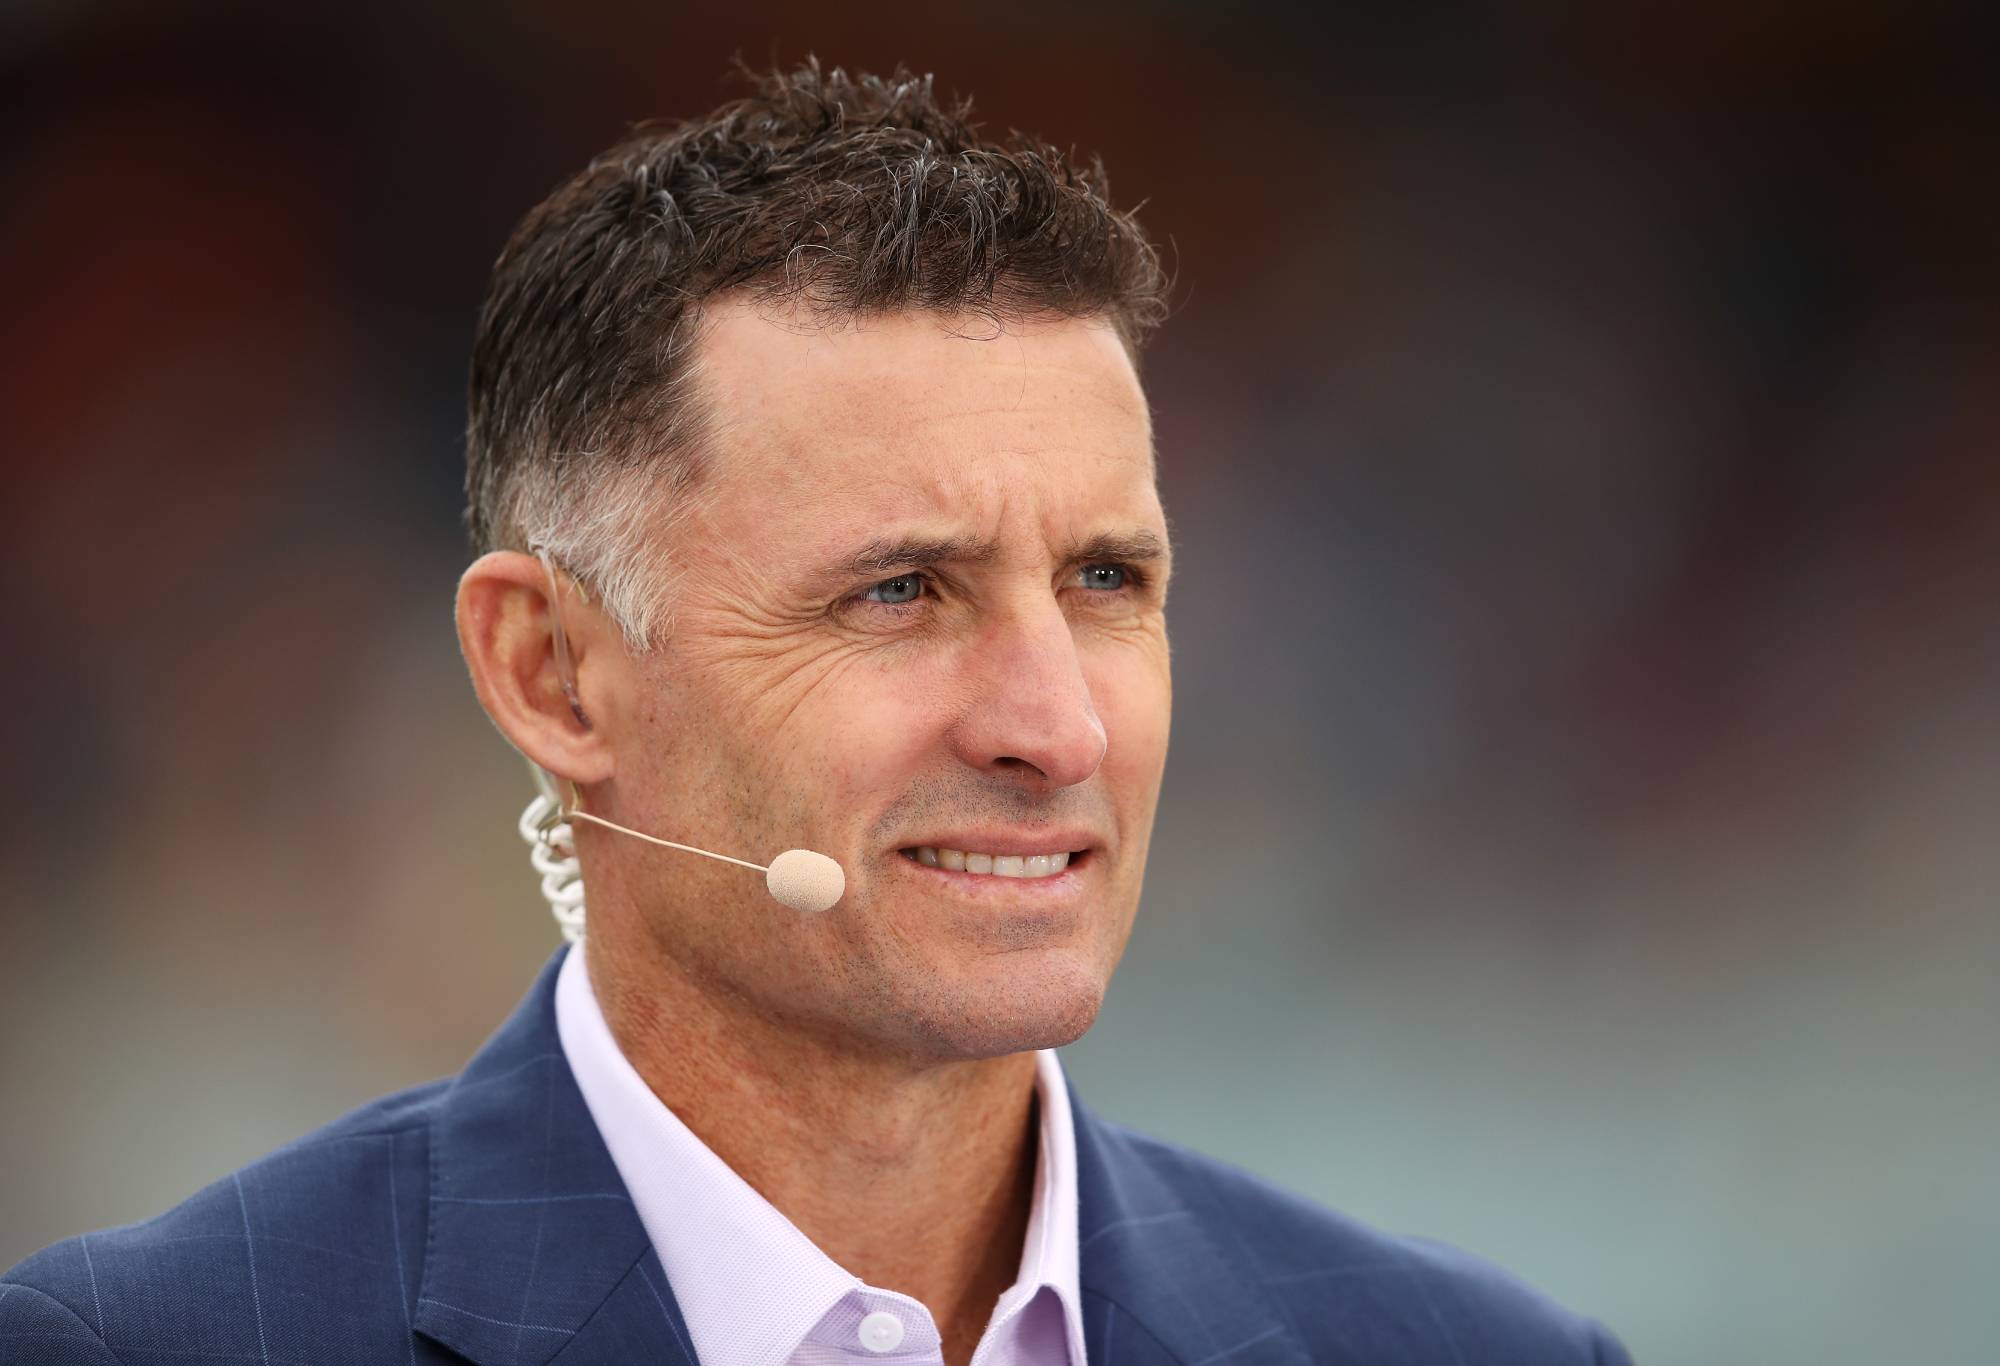 CANBERRA, AUSTRALIA - FEBRUARY 01: Fox Cricket commentator Michael Hussey watches on as he presents in the pre-match before play on day one of the Second Test match between Australia and Sri Lanka at Manuka Oval on February 01, 2019 in Canberra, Australia. (Photo by Mark Kolbe/Getty Images)